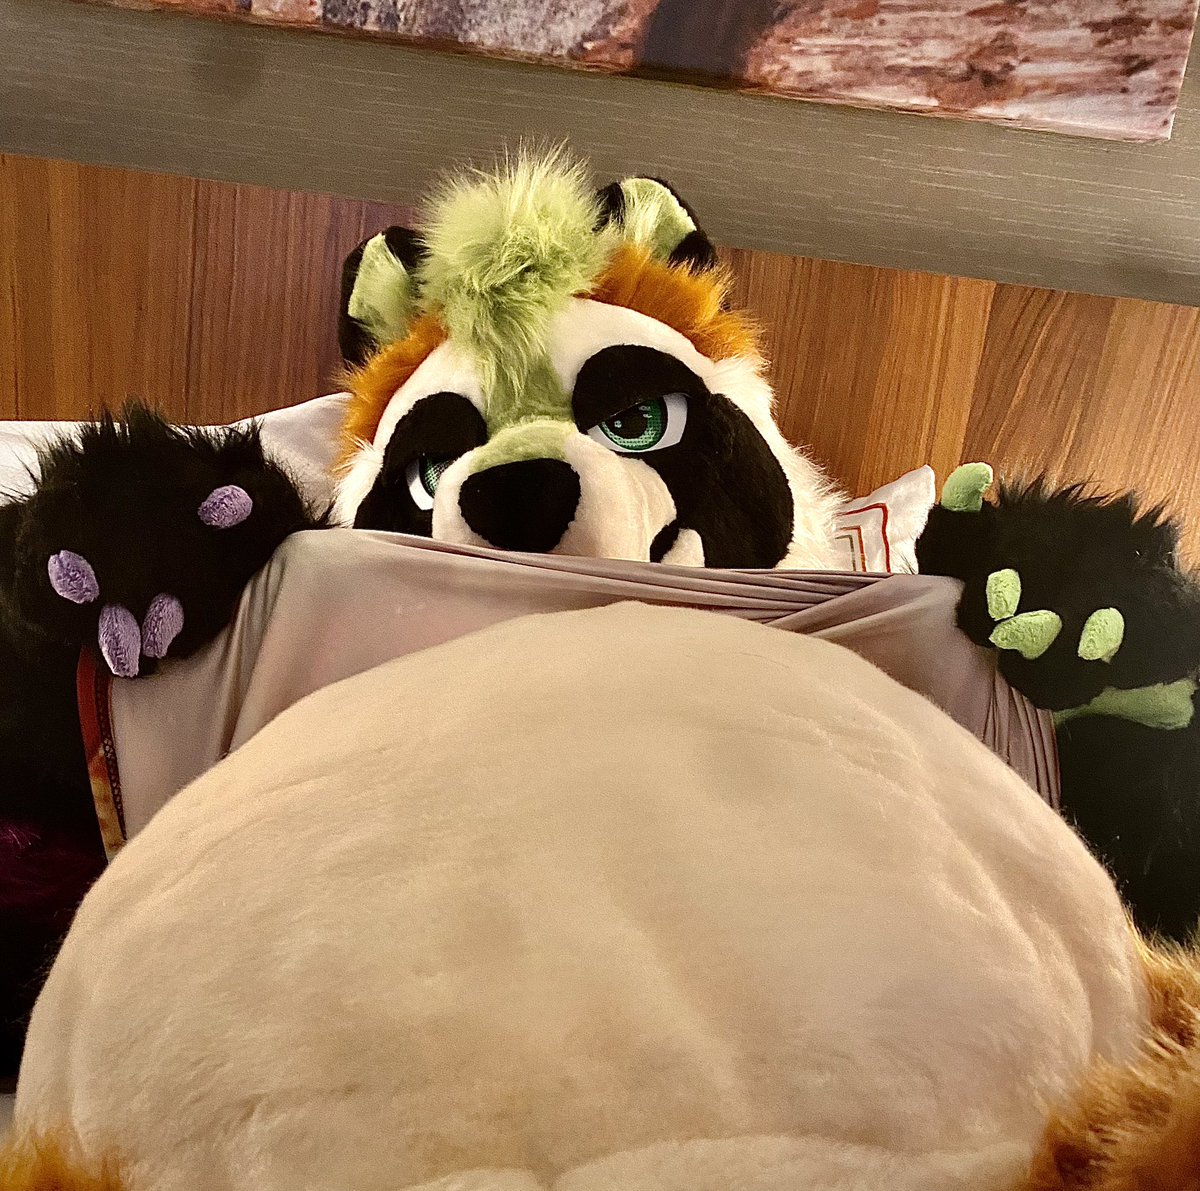 I showed you my belly plz respond with your fuzzy belly